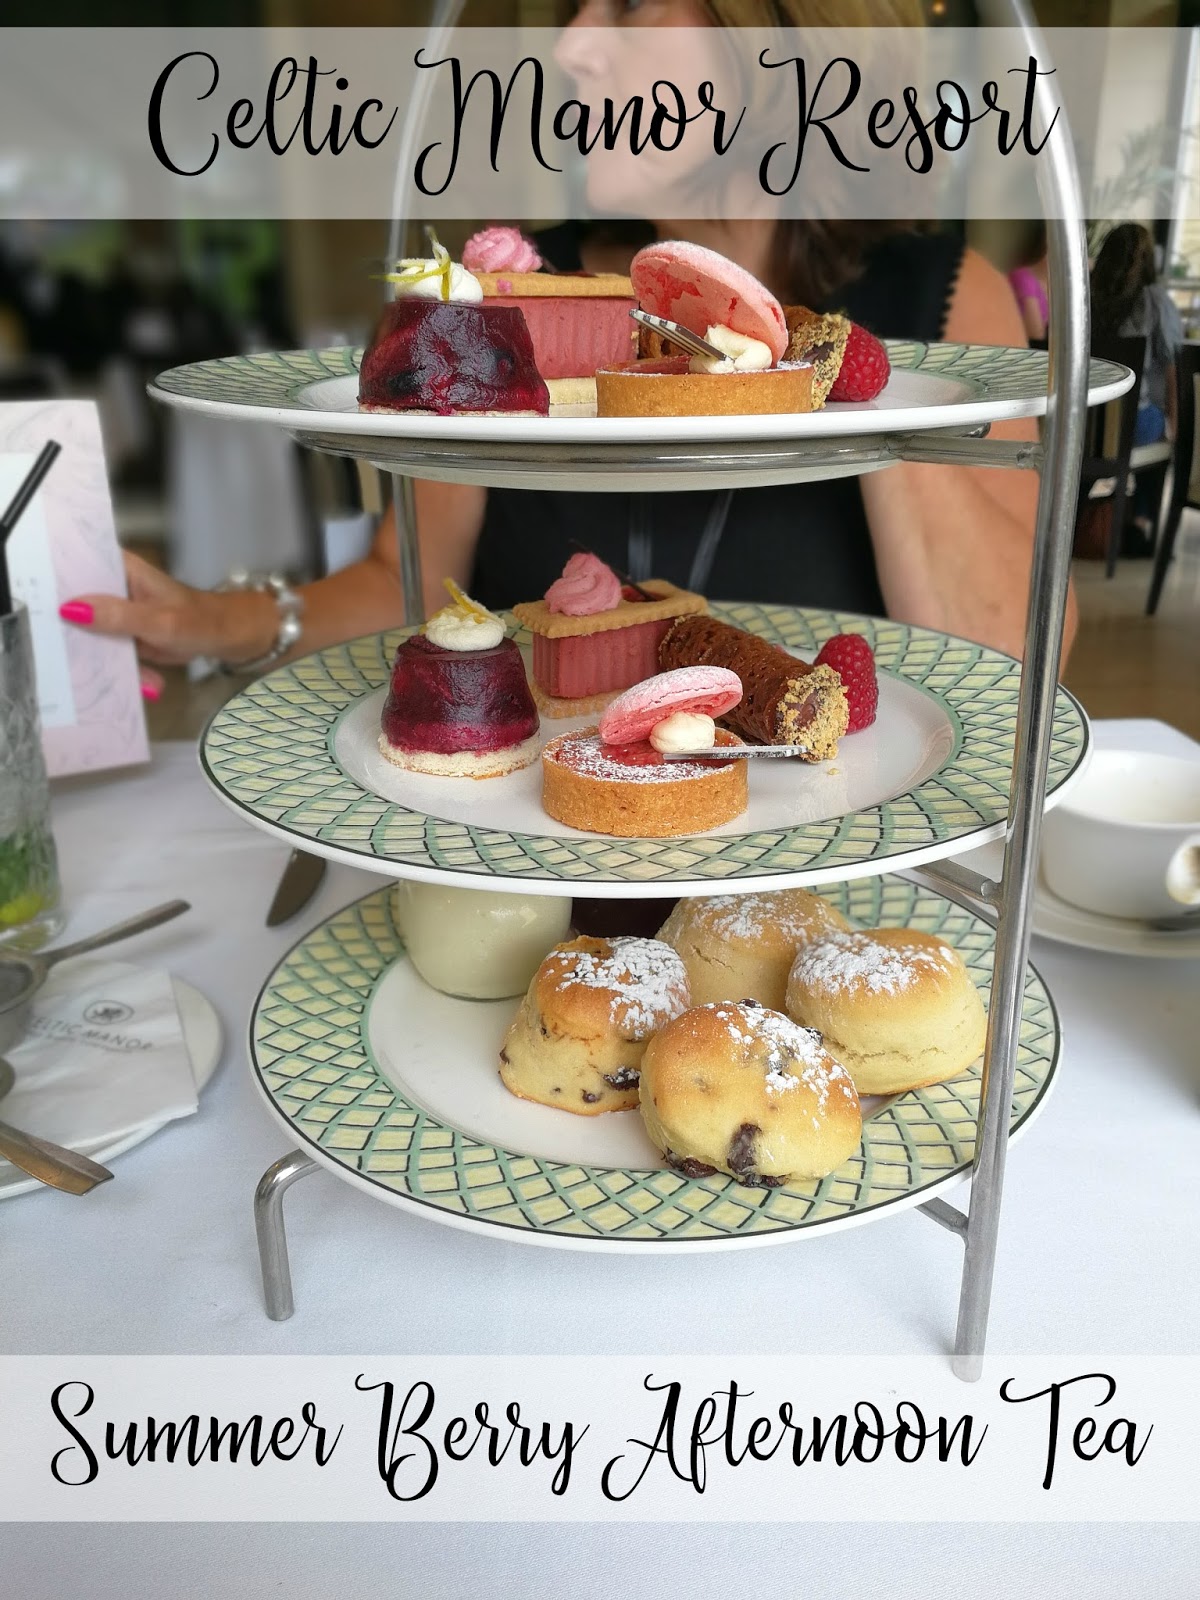 The Celtic Manor Resort Summer Berry Afternoon Tea